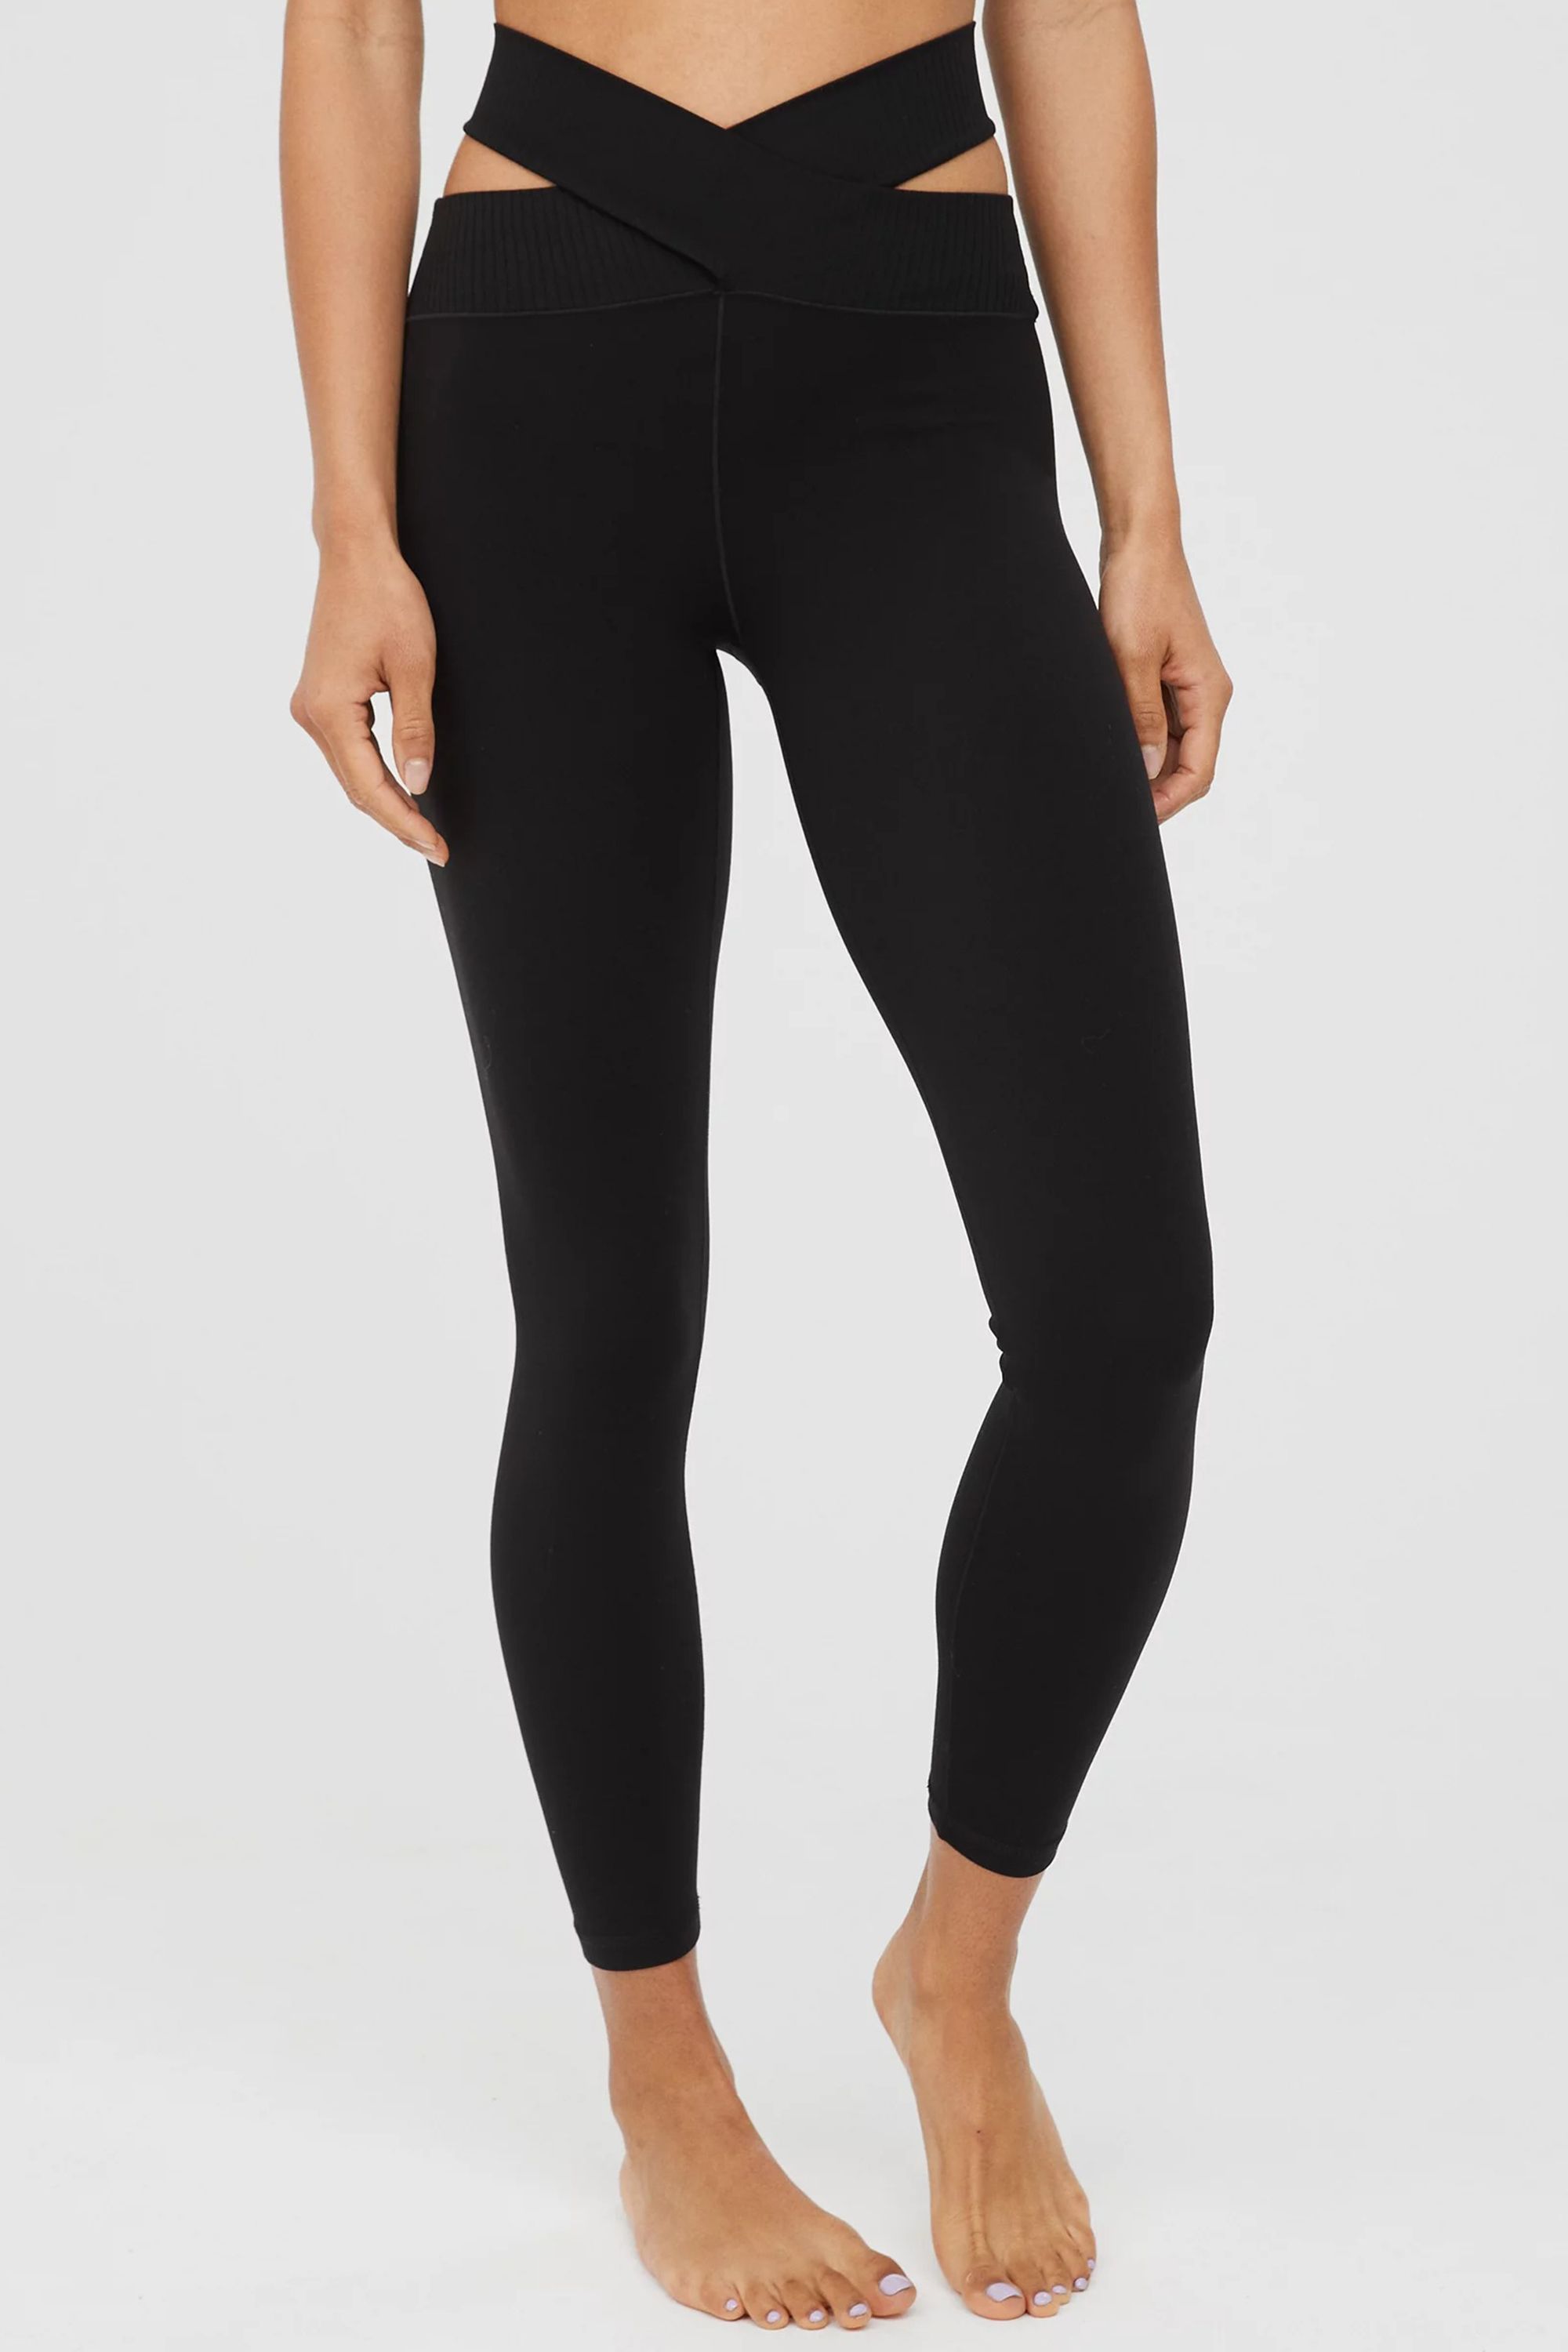 Among Thousands of Leggings on Amazon, These 6 Under $30 Are the Best